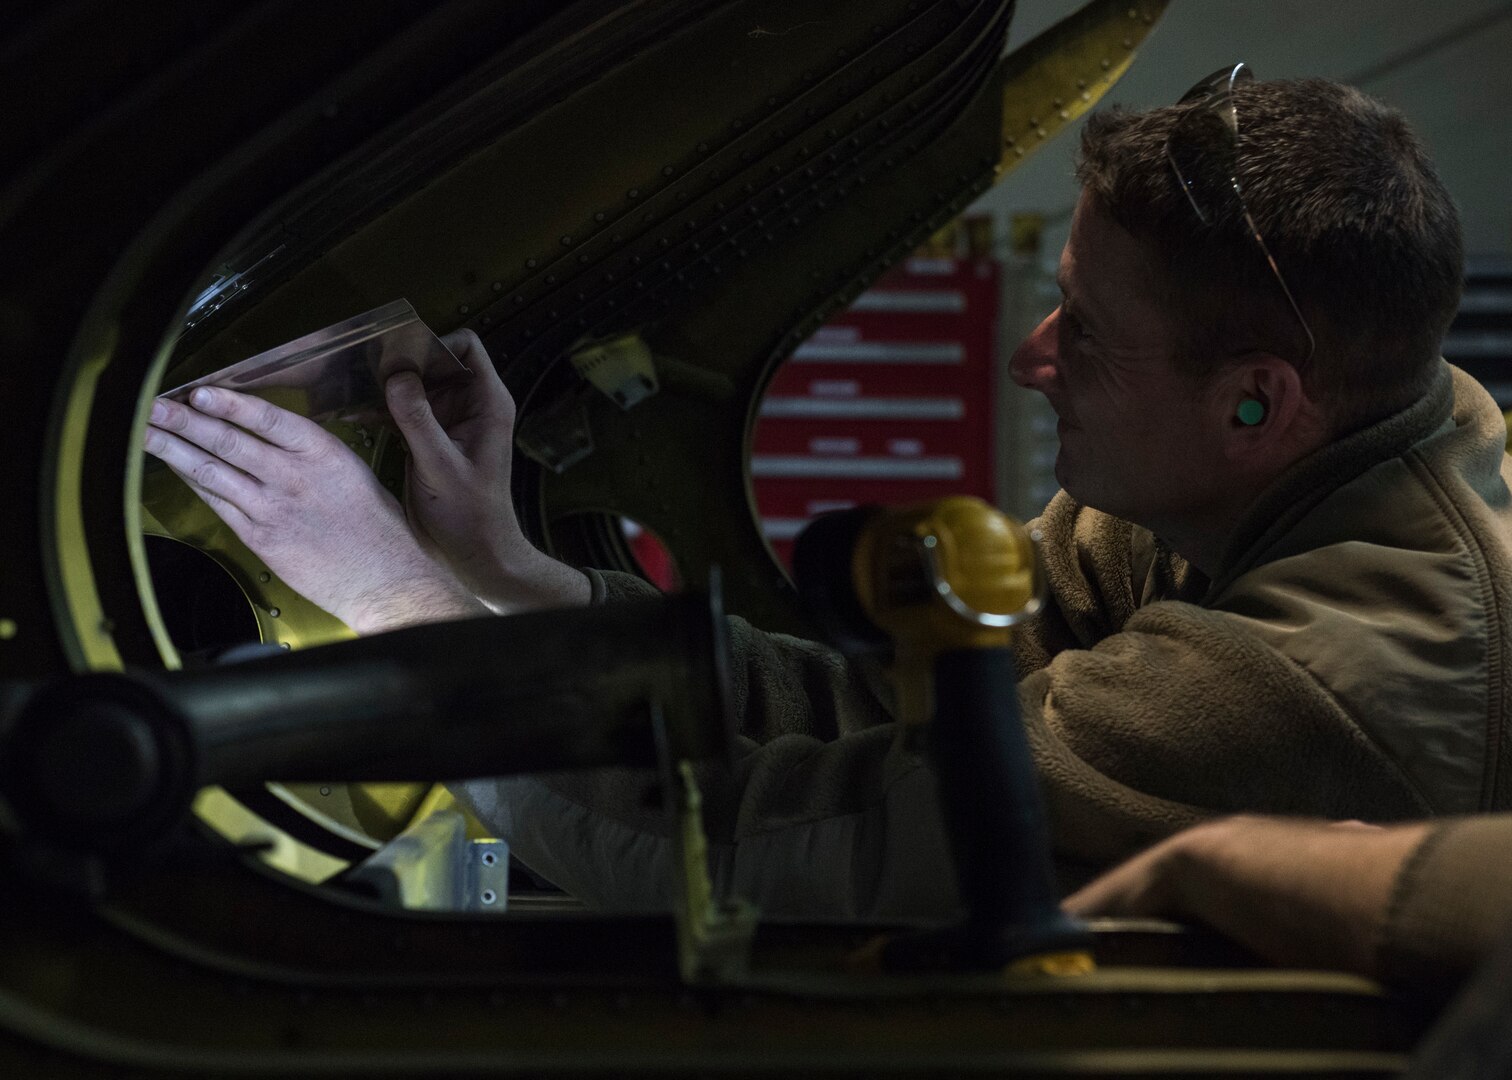 Master Sgt. Andrew Liederbach, 386th Expeditionary Maintenance Squadron combat metals flight chief, checks the fitment of one of the pieces they fabricated for a repair at an undisclosed location in Southwest Asia, Feb. 5, 2019. During the repair of the leading edge of a C-130 wing, the combat metals flight fabricated more the 30 different parts from scratch.